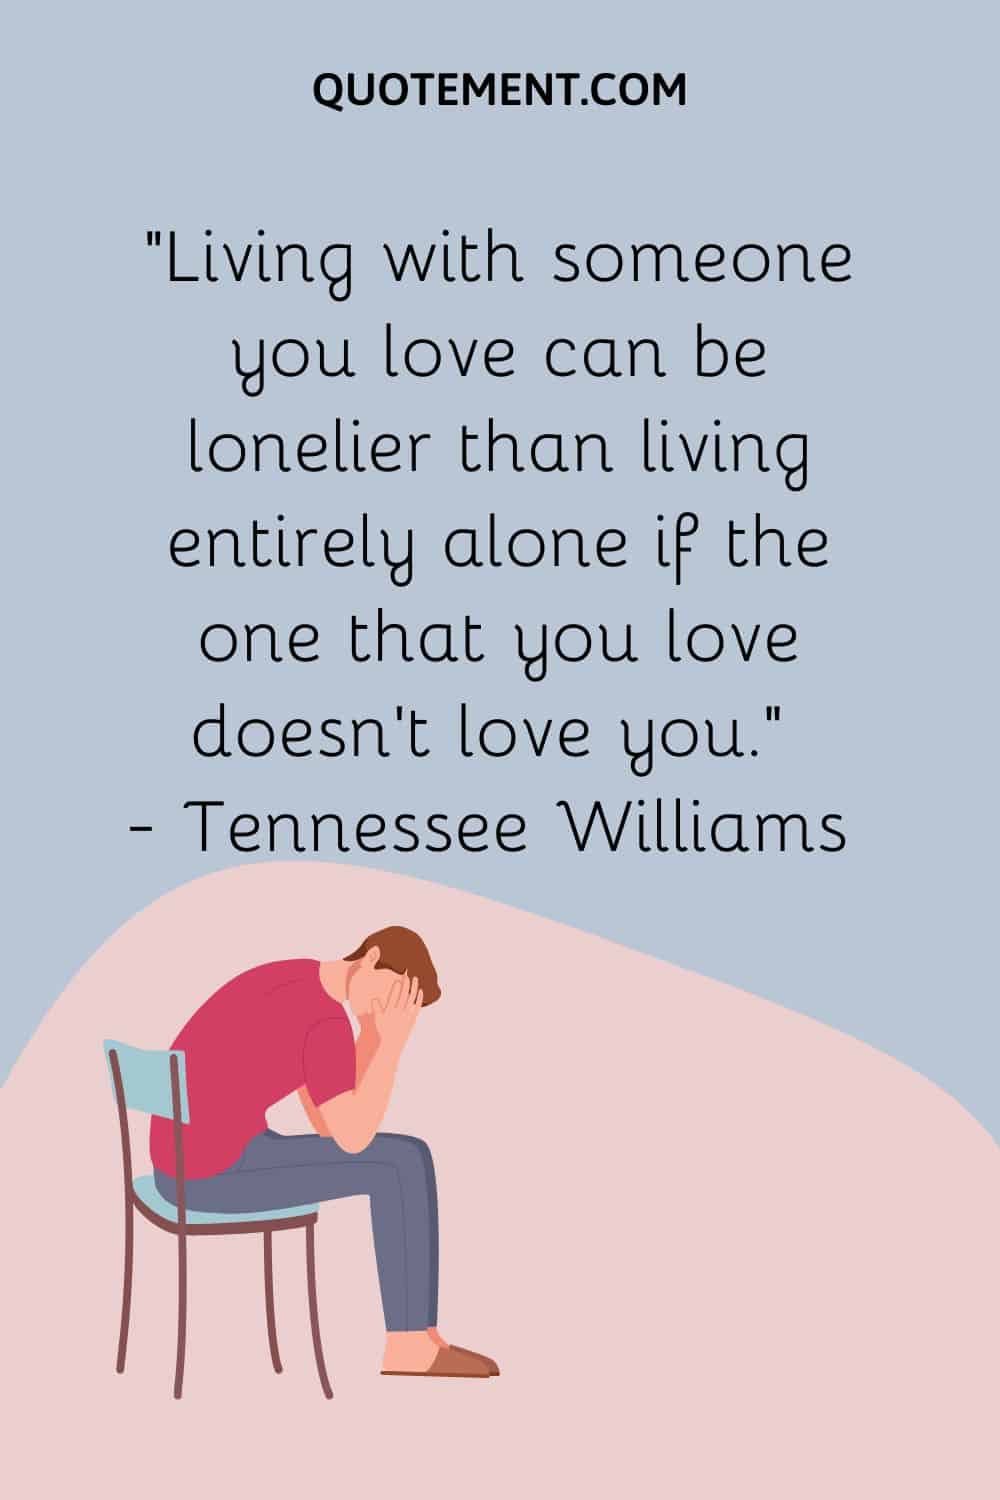 Living with someone you love can be lonelier than living entirely alone if the one that you love doesn’t love you